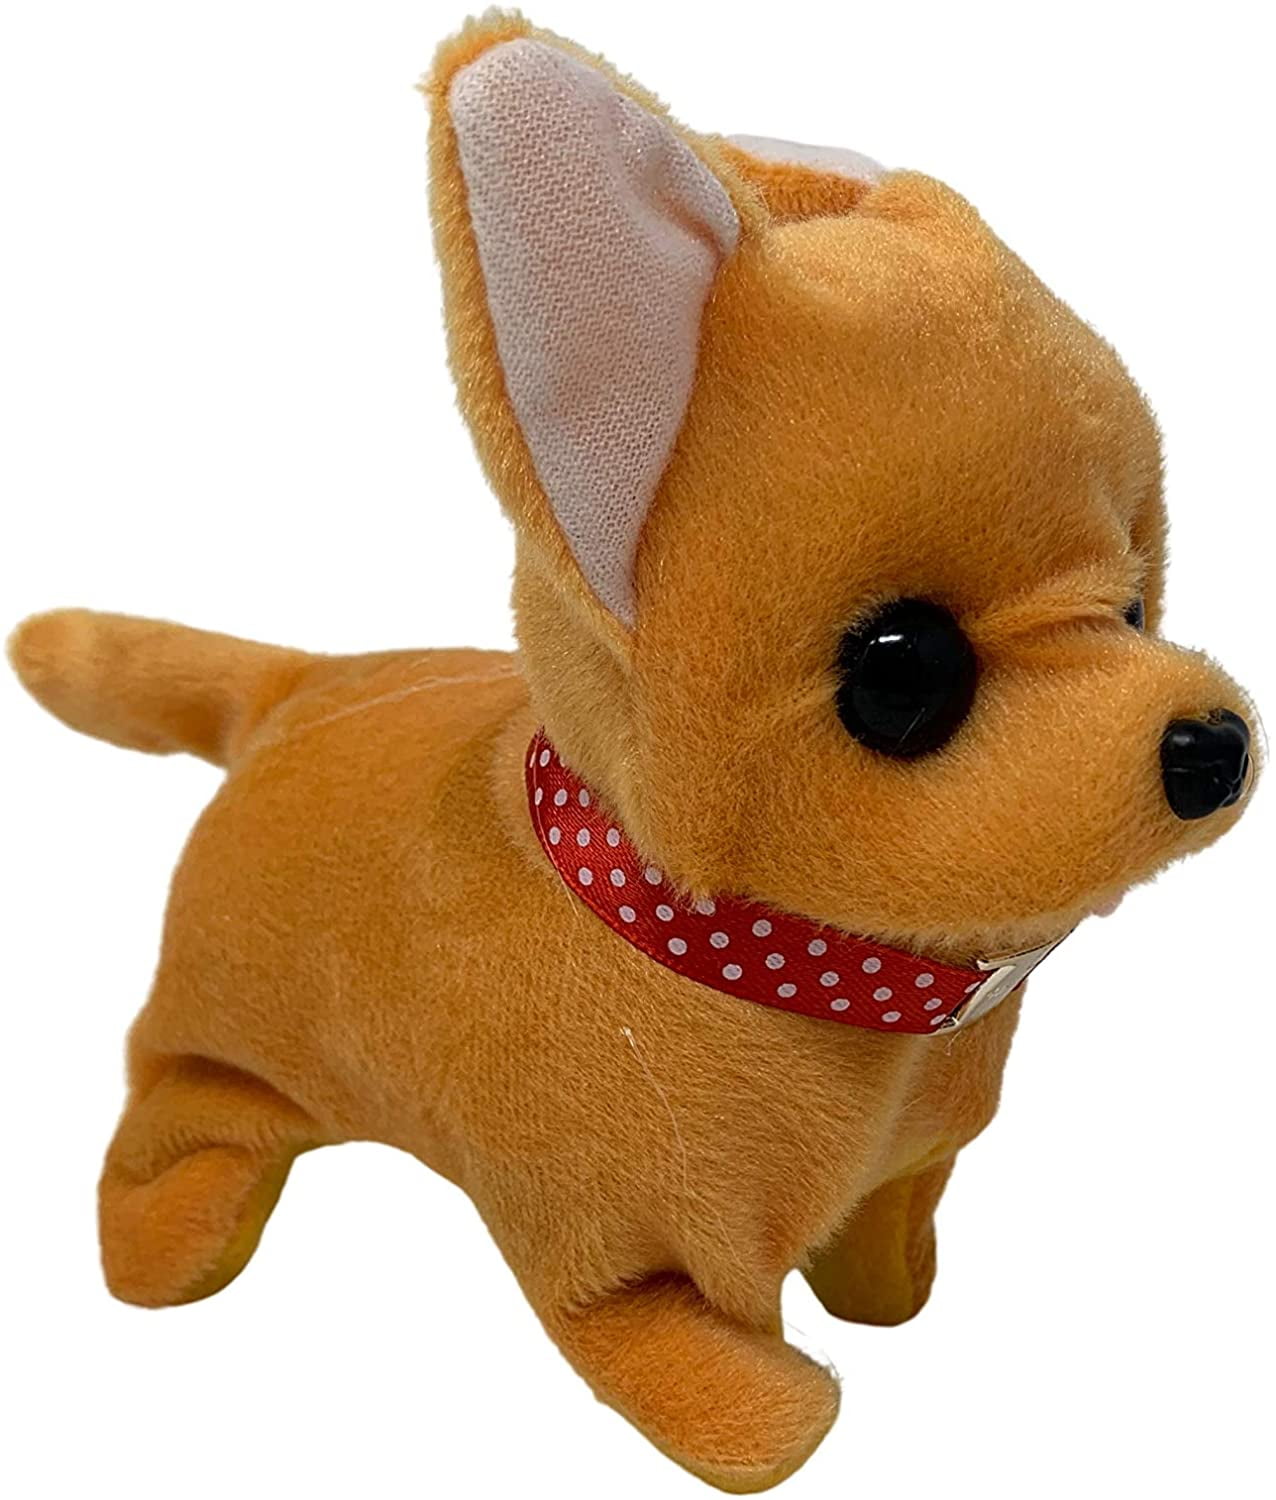 CHIHUAHUA WALKING BARKING TOY MOVING DOG play pet battery operated NEW electric 